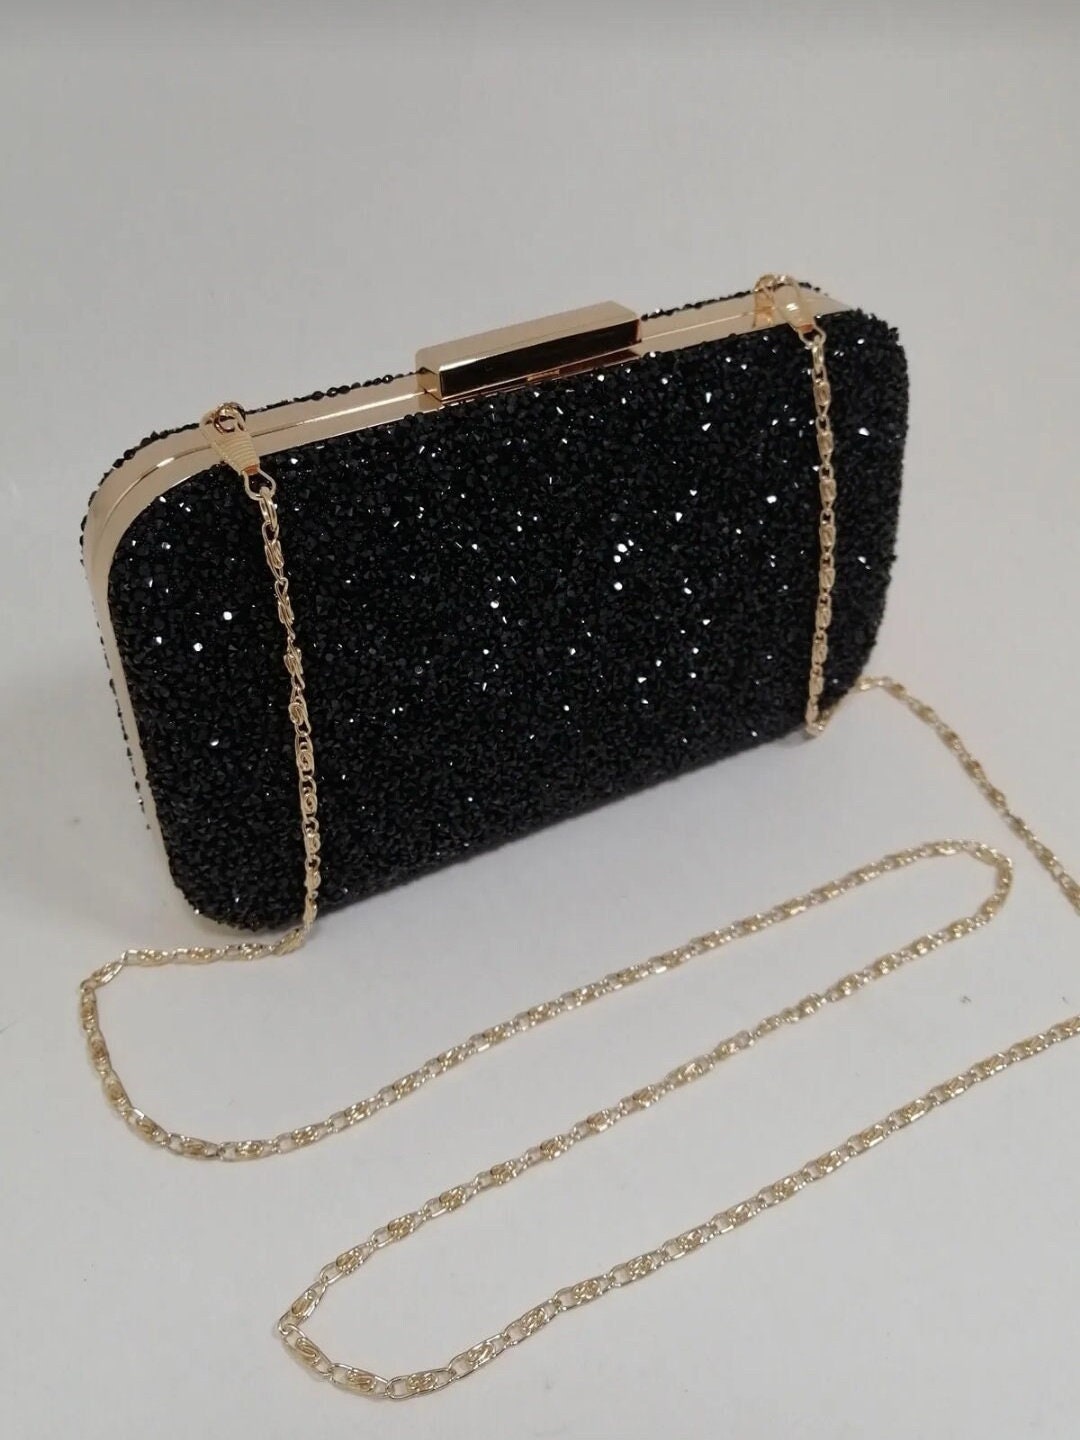 Clutch Bag Black and silver Color fabric and Golden thin Wire Work chain  hanging clutches Purses